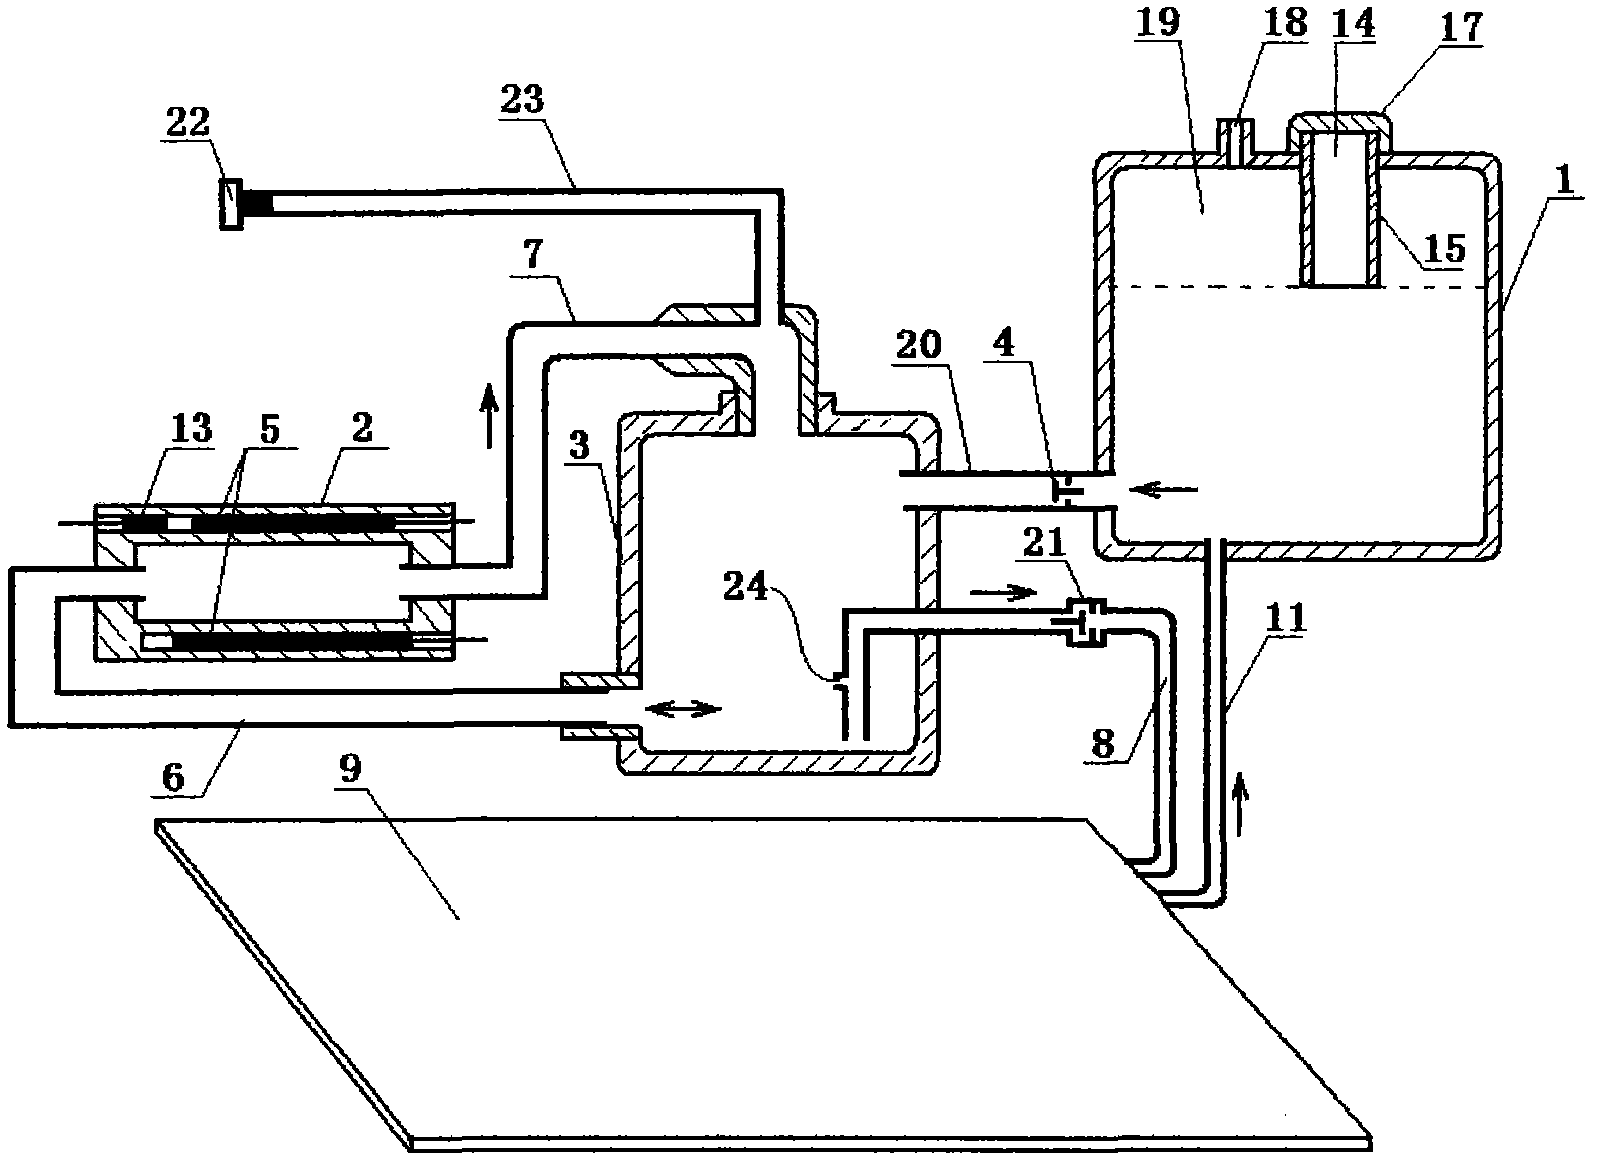 Heat energy water circulation system